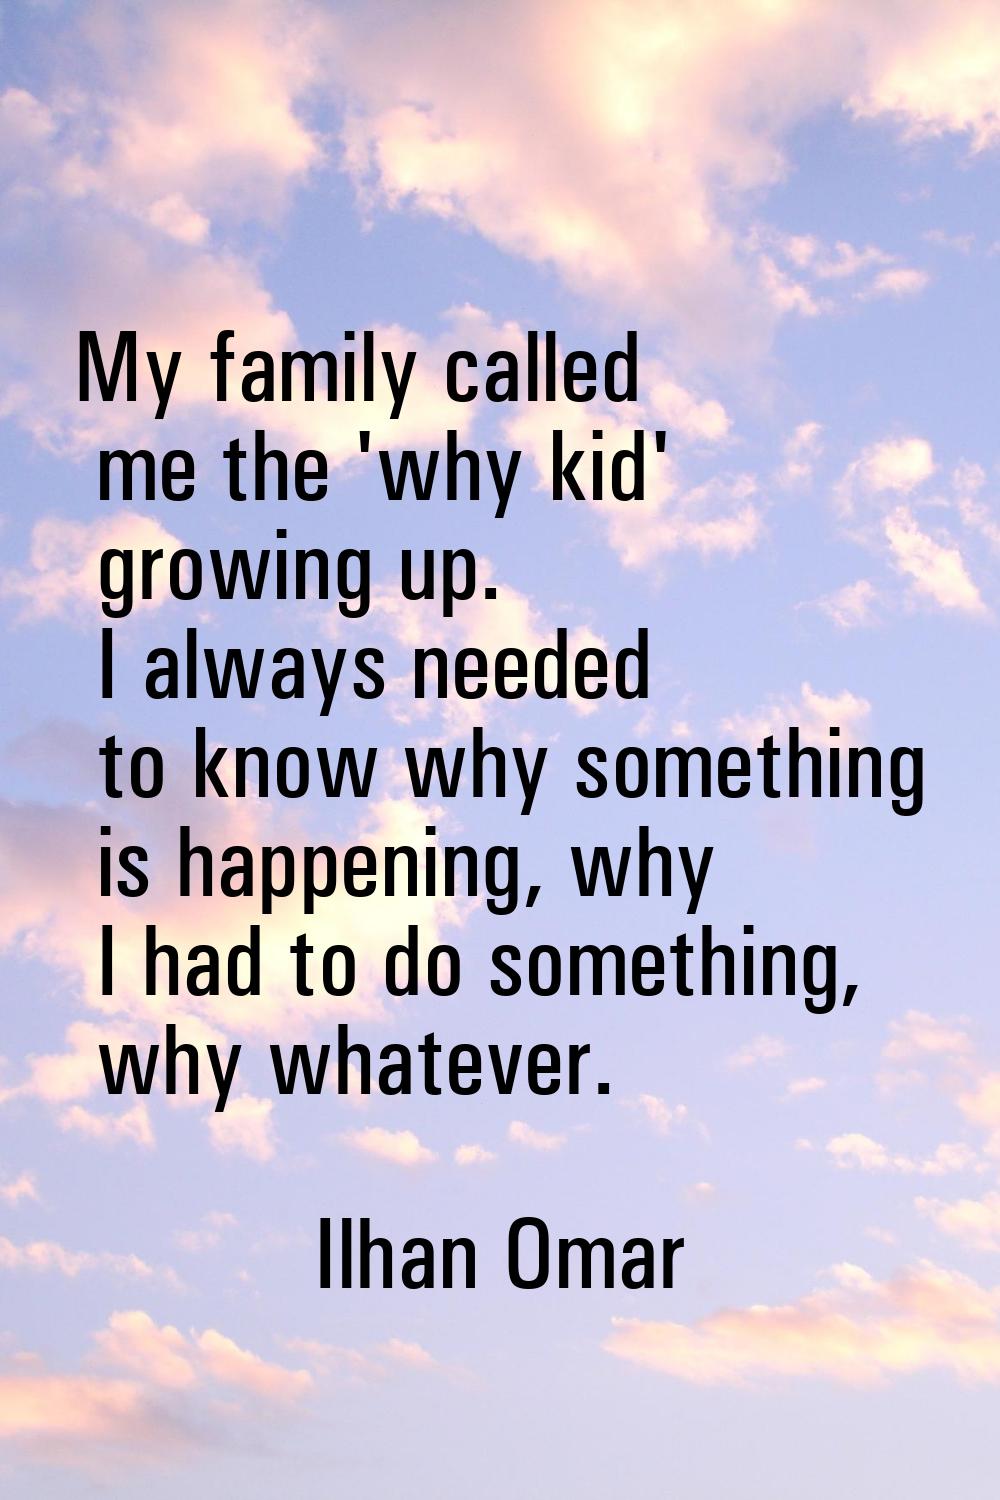 My family called me the 'why kid' growing up. I always needed to know why something is happening, w